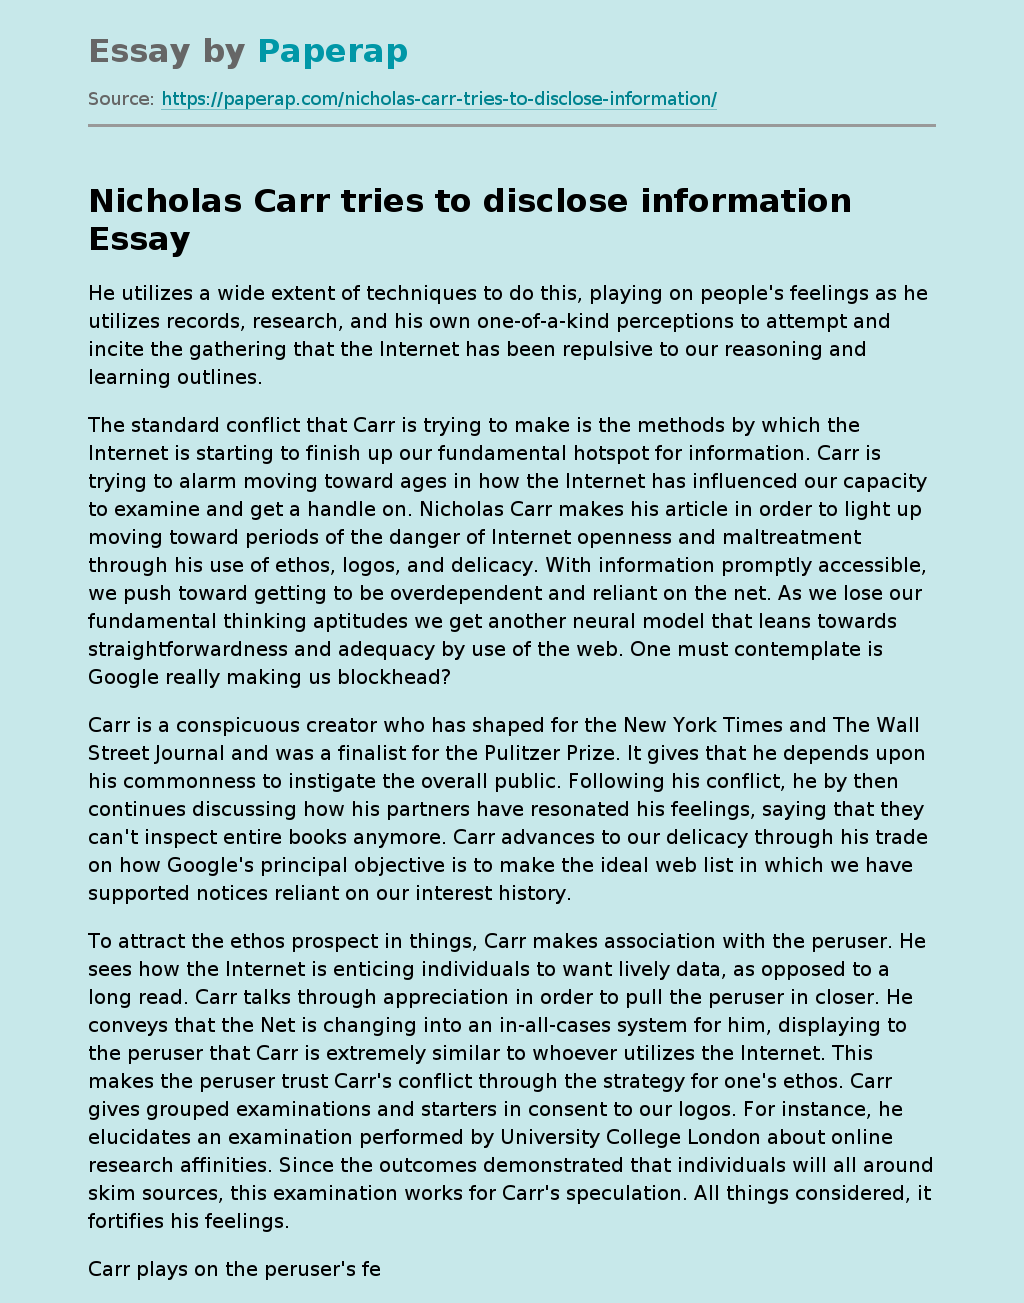 Nicholas Carr tries to disclose information